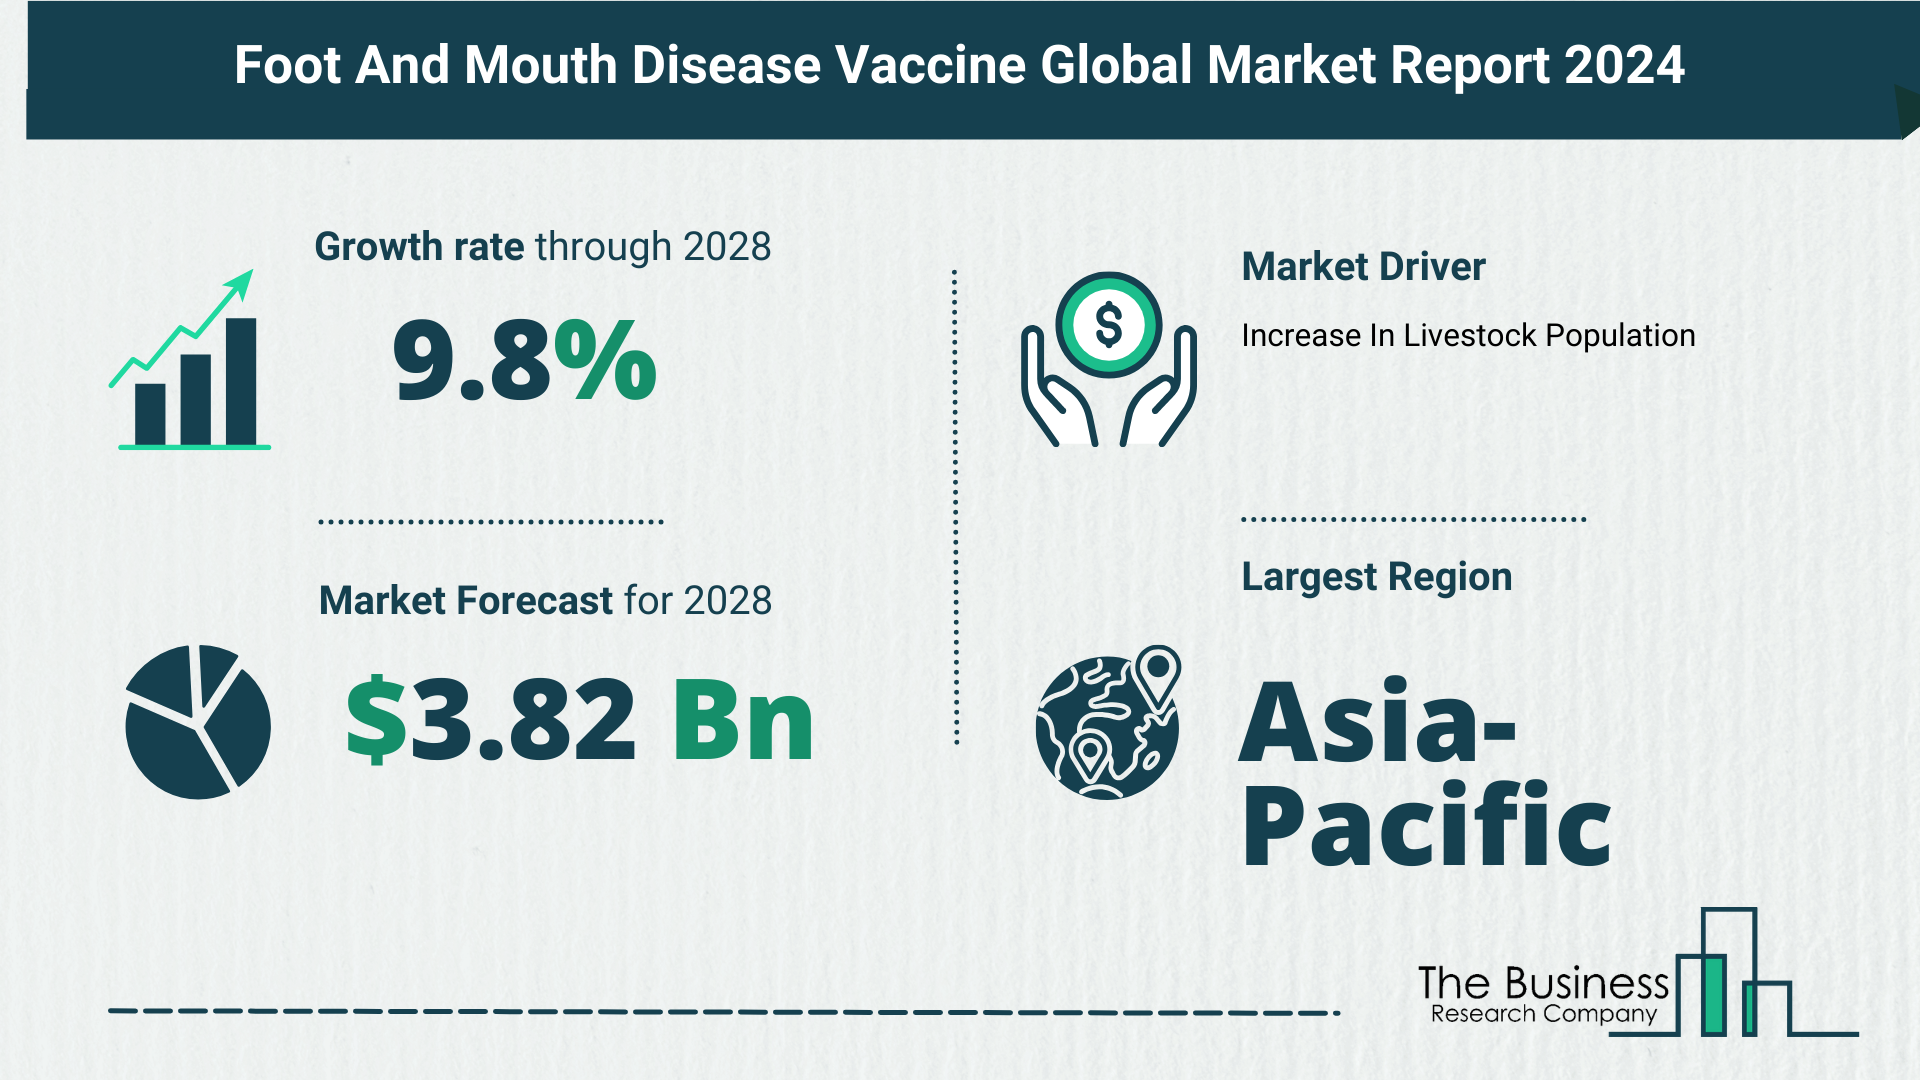 Global Foot And Mouth Disease Vaccine Market Analysis: Estimated Market Size And Growth Rate